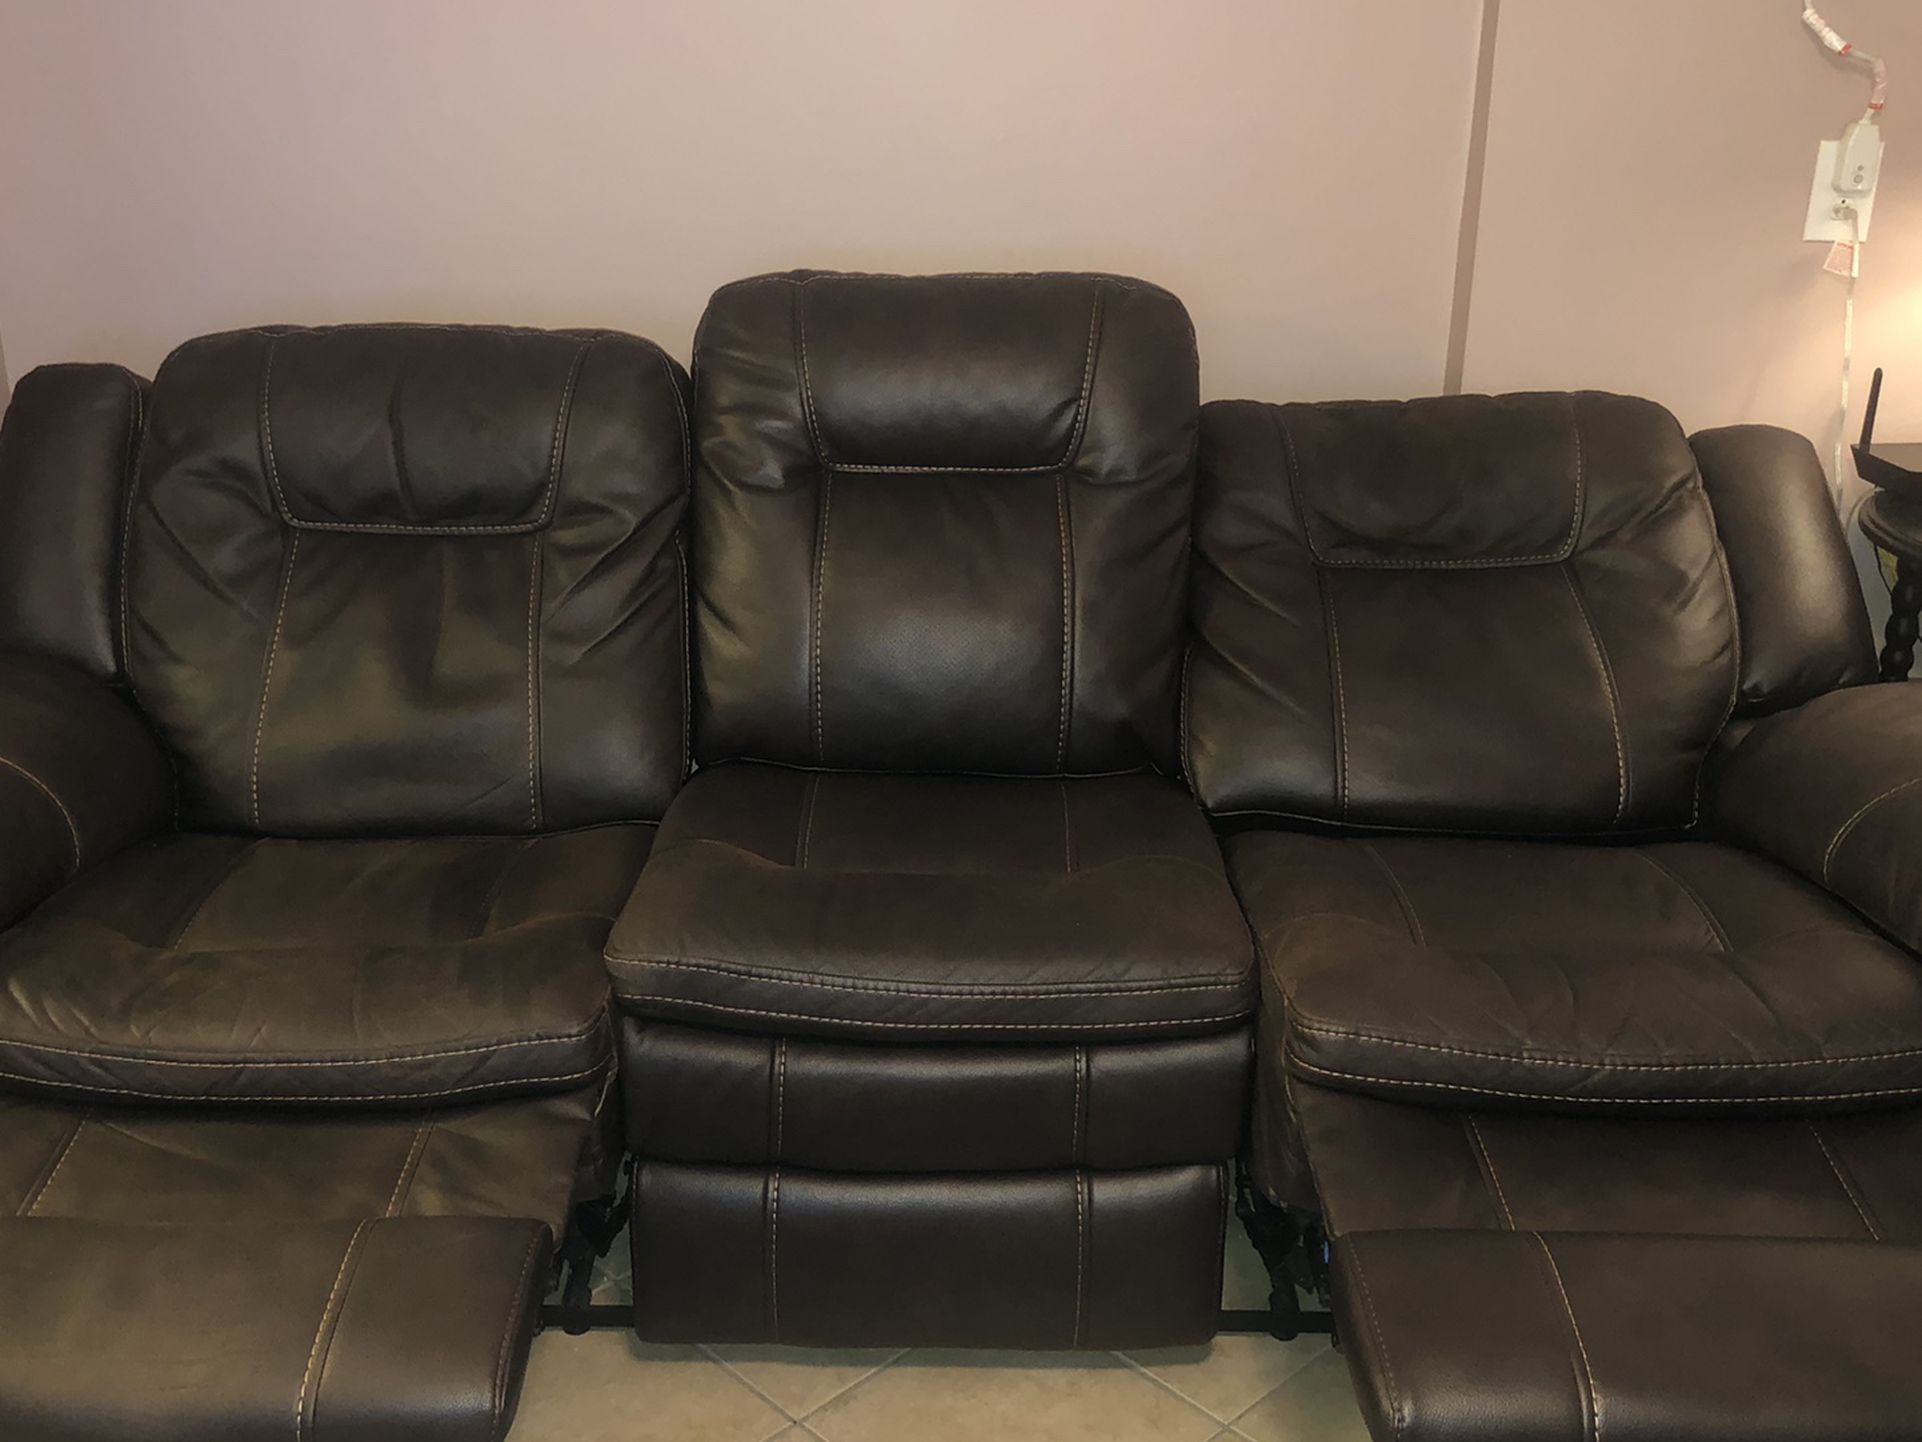 1 Recliner Couch. Electric